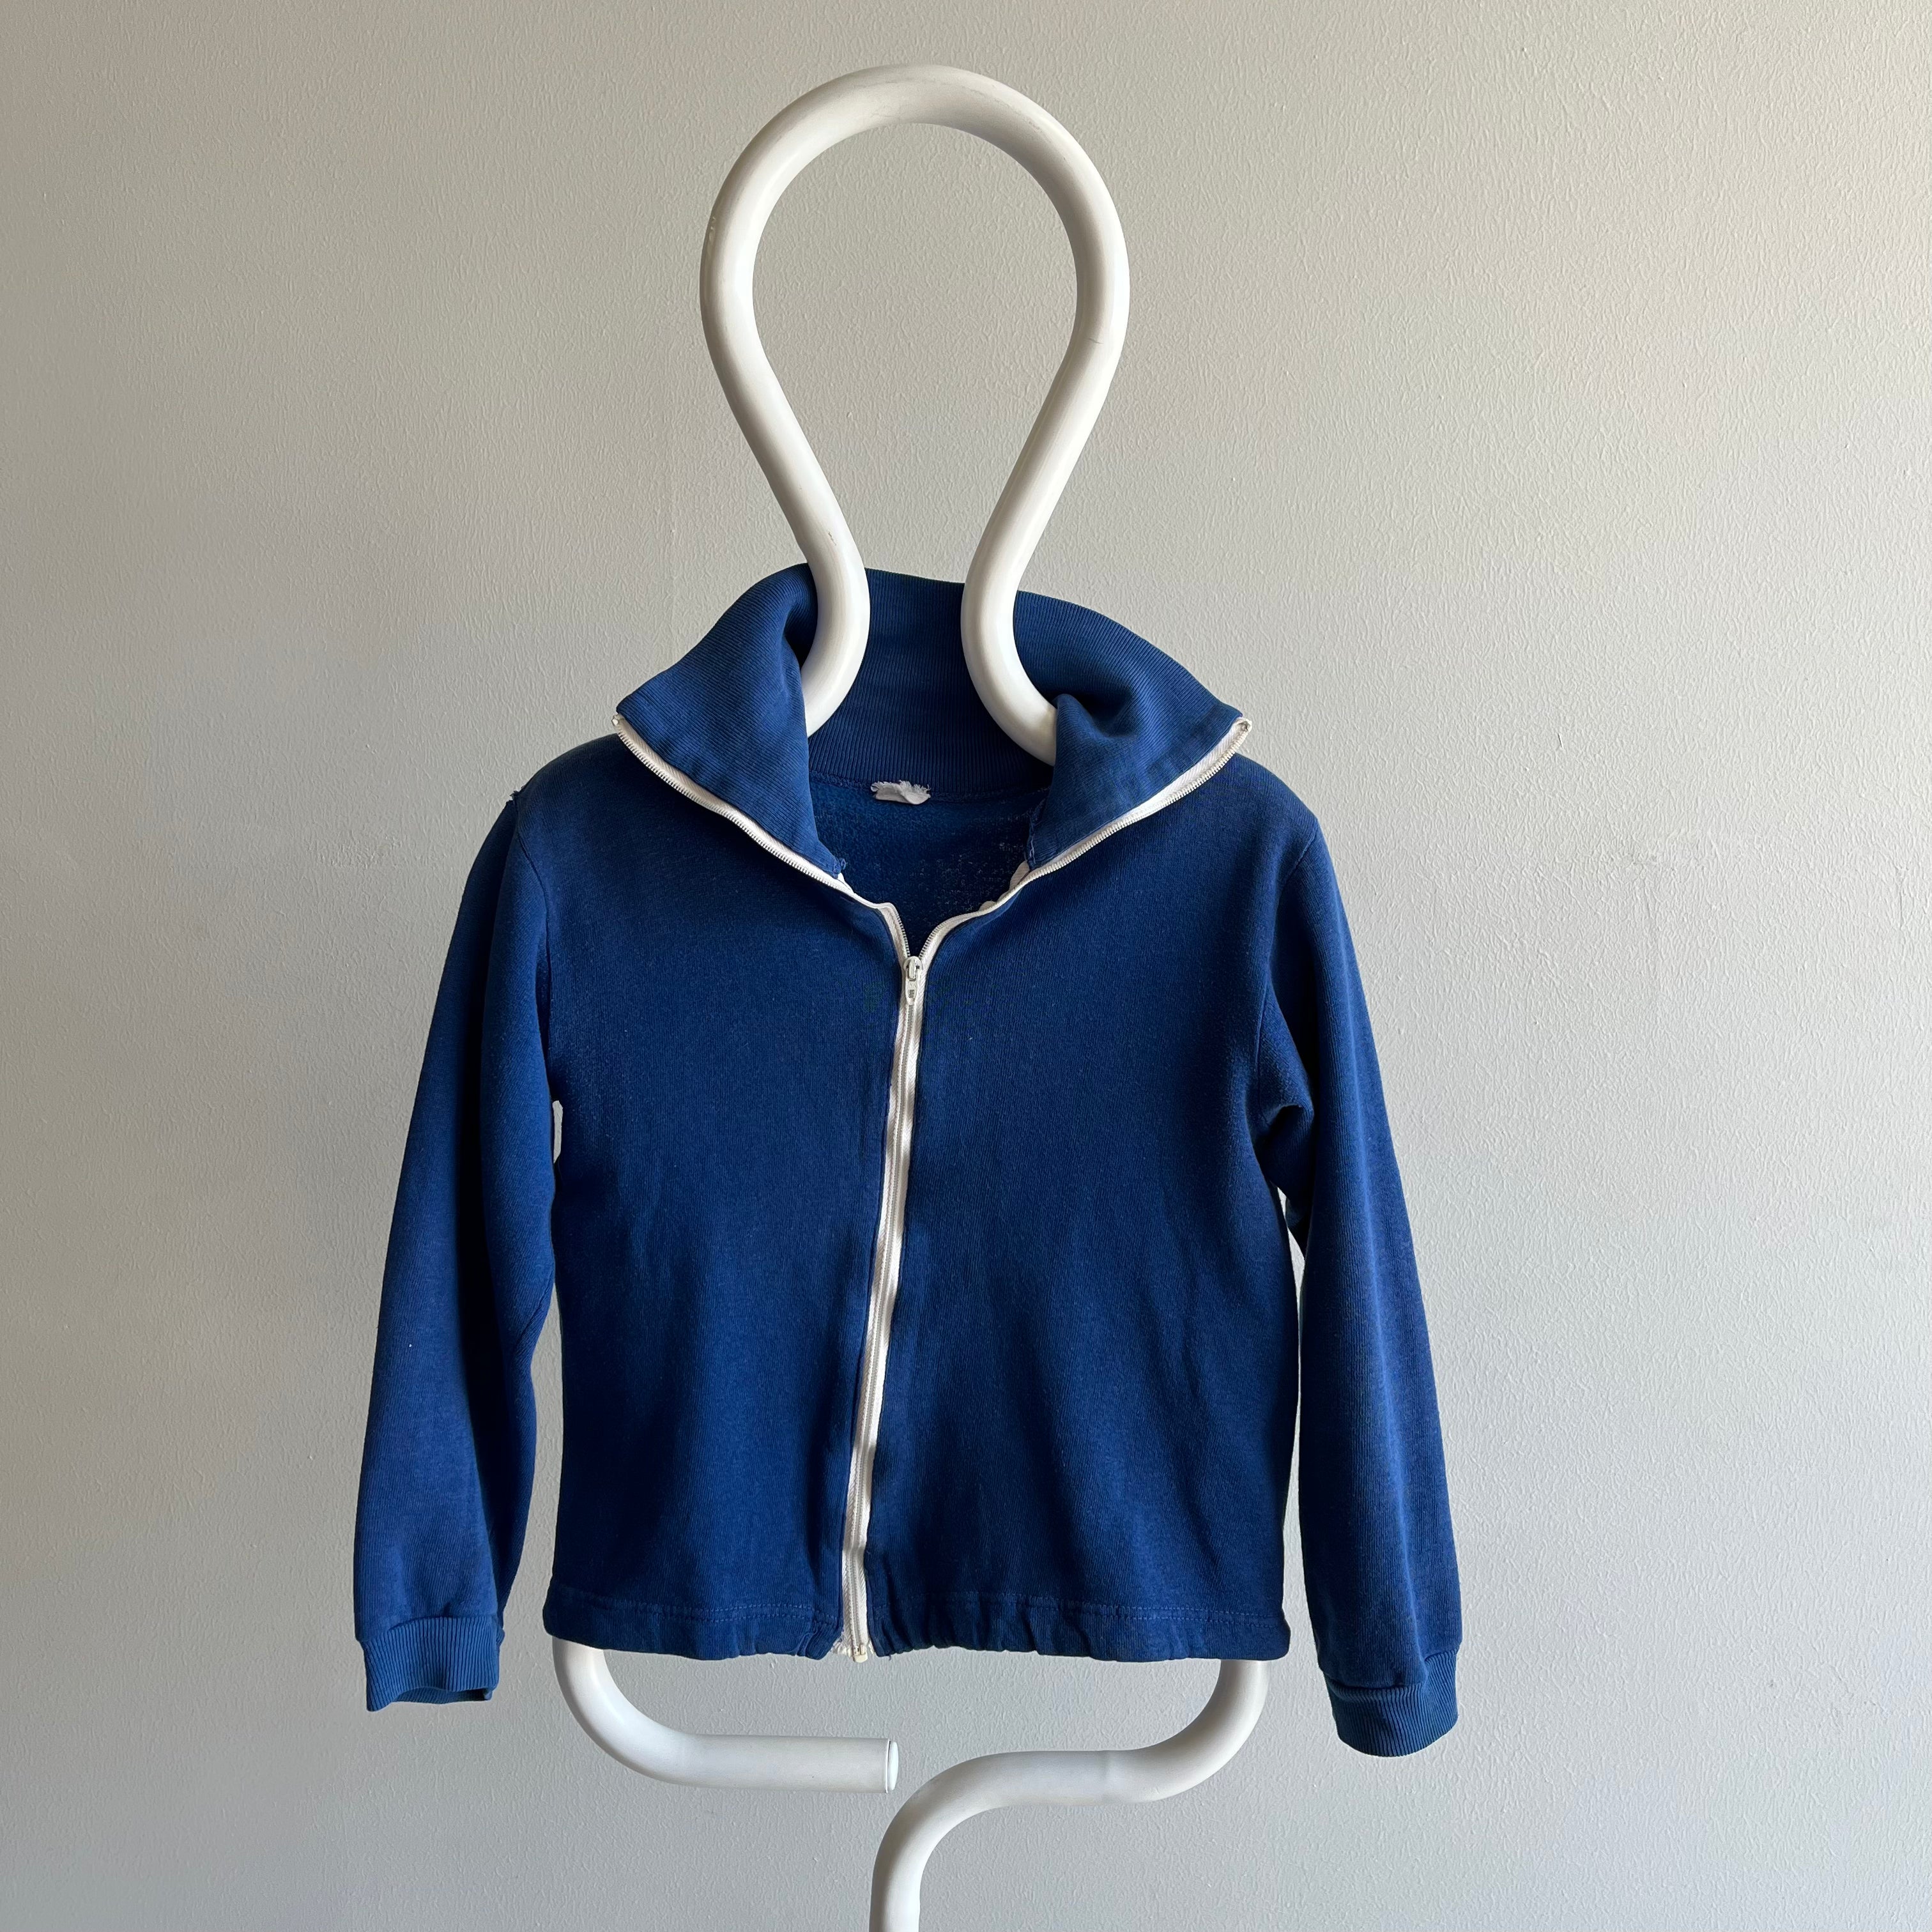 1960/70s Beat Up and Slouchy Mock Neck Zip Up